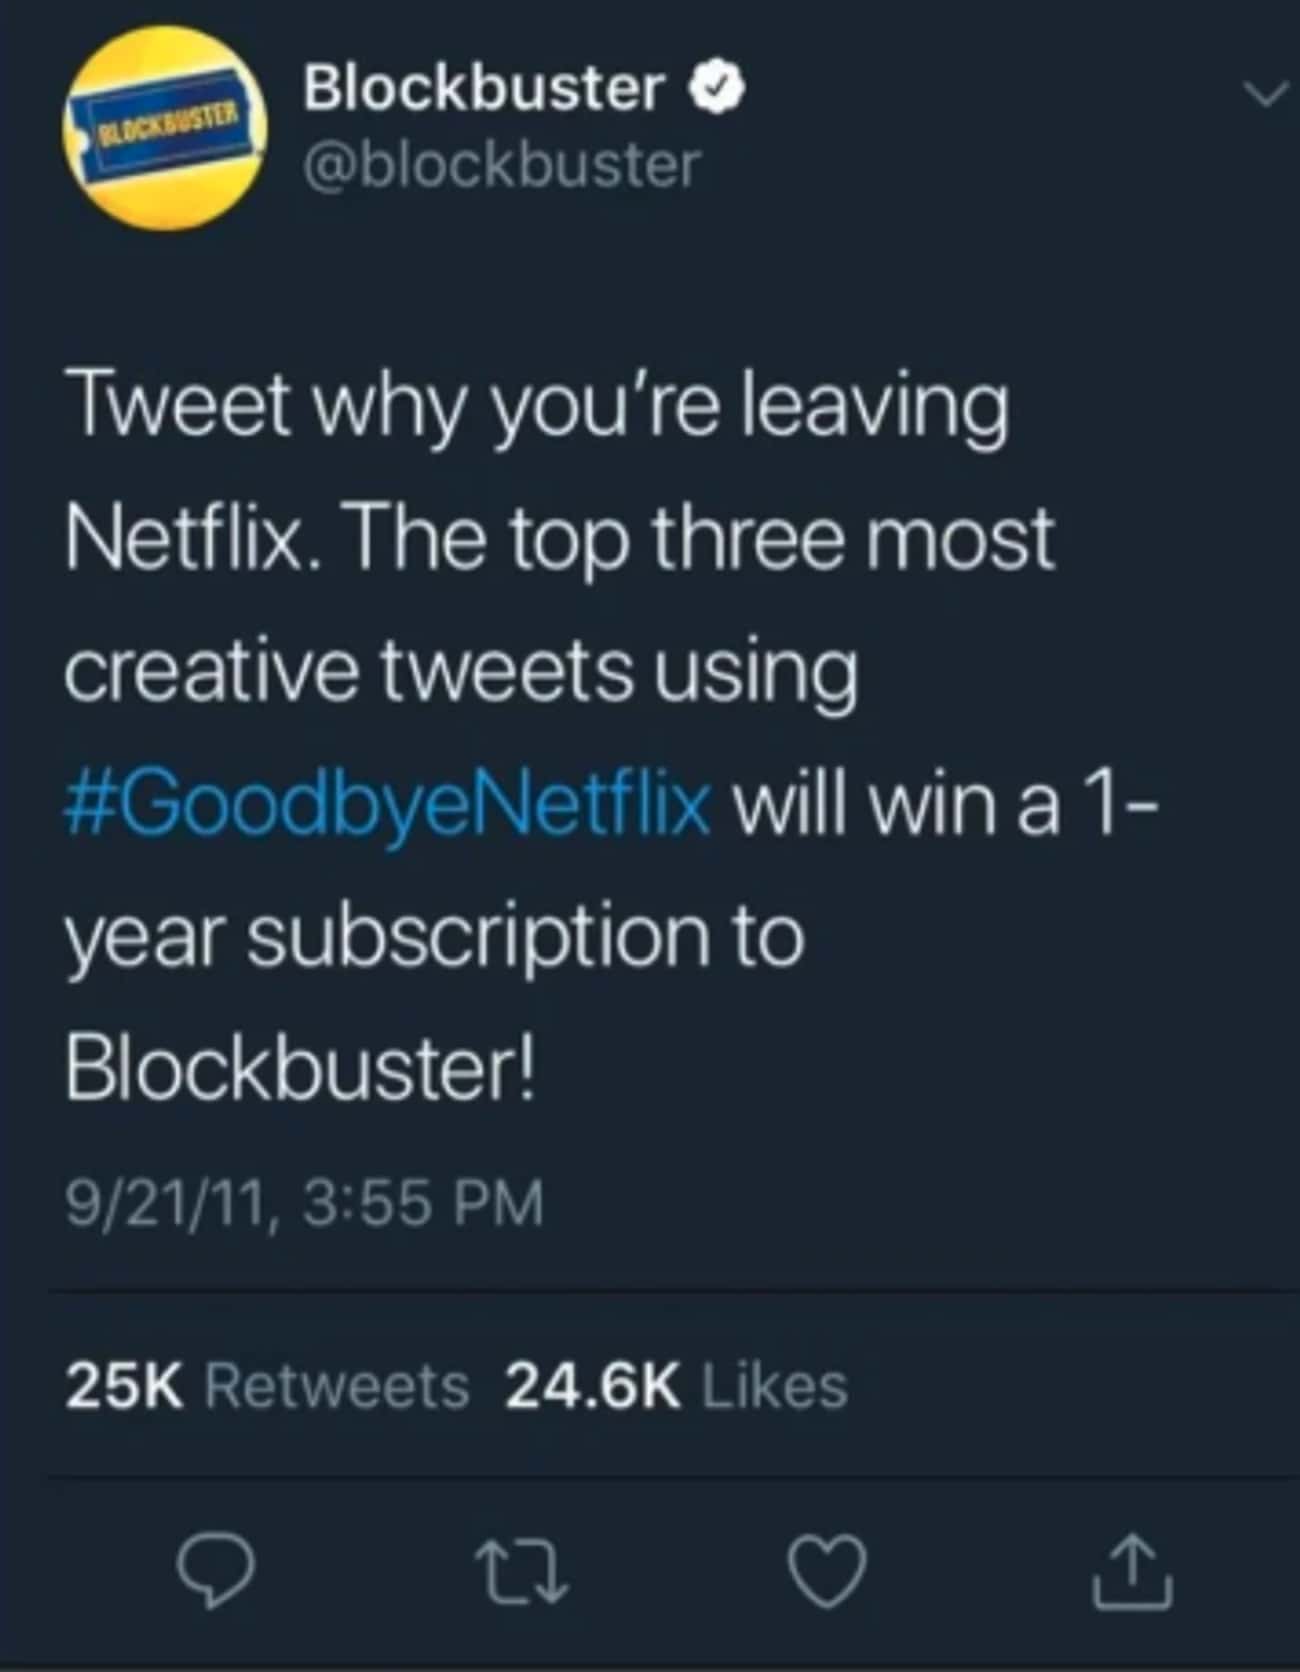 What's Blockbuster?